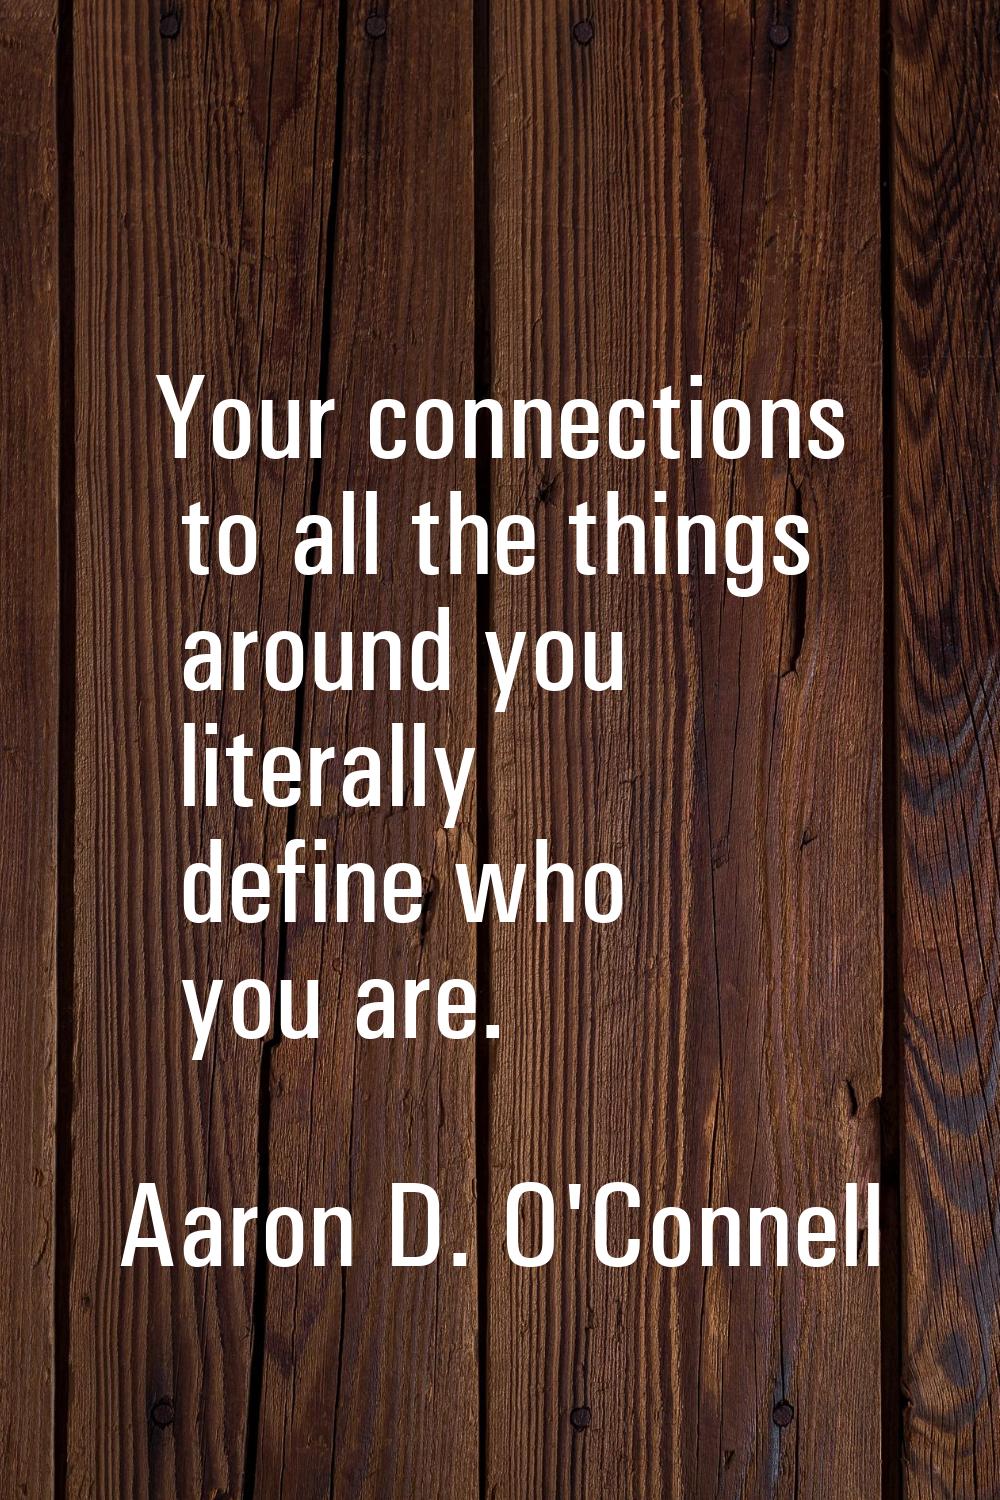 Your connections to all the things around you literally define who you are.